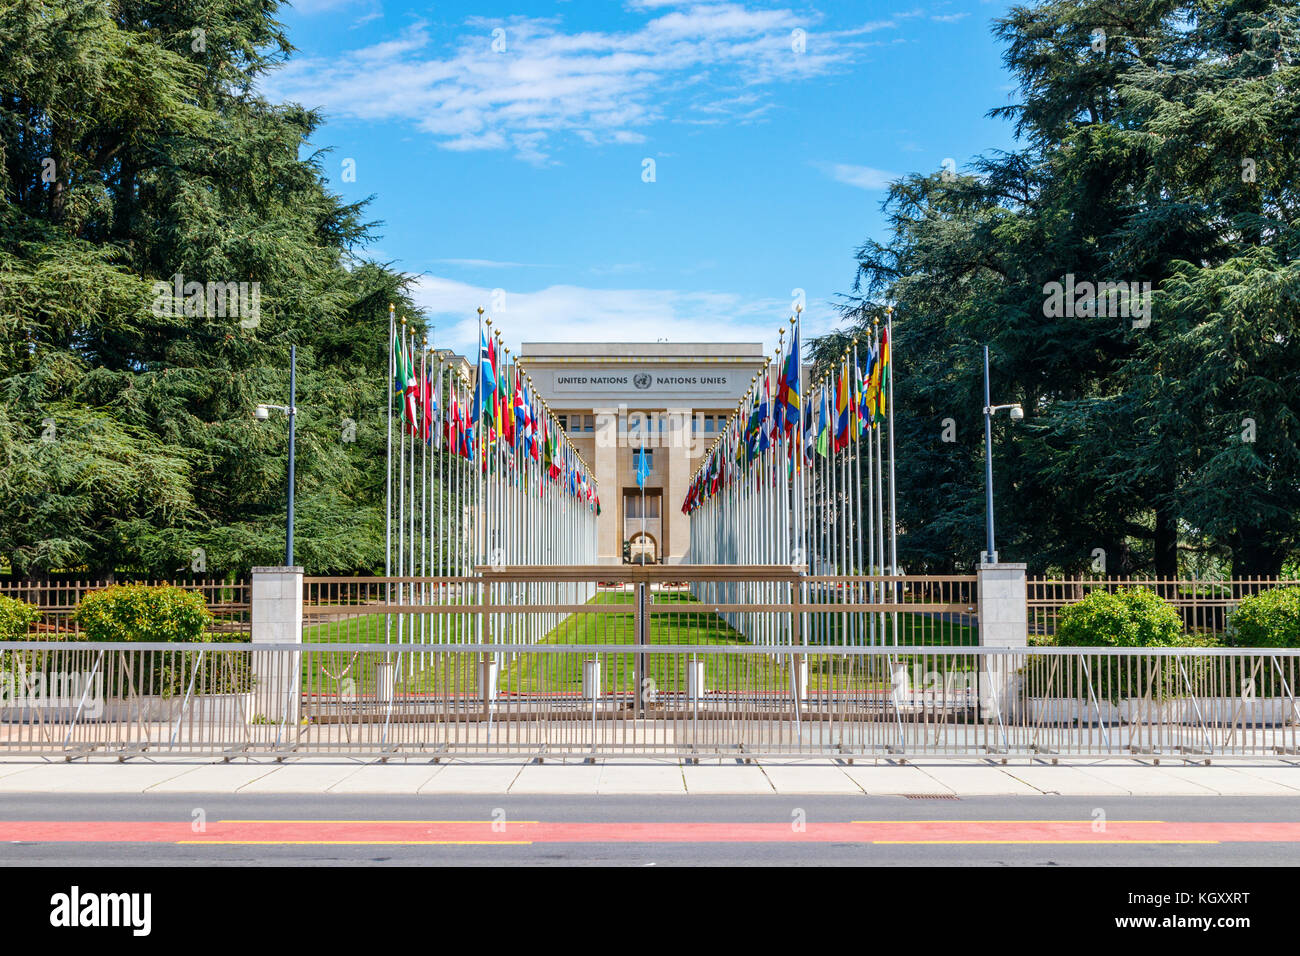 Square of the Nations with the Geneva United Nations Palace, with the flags of the member countries, guarded with a fence and cameras. Switzerland. Stock Photo